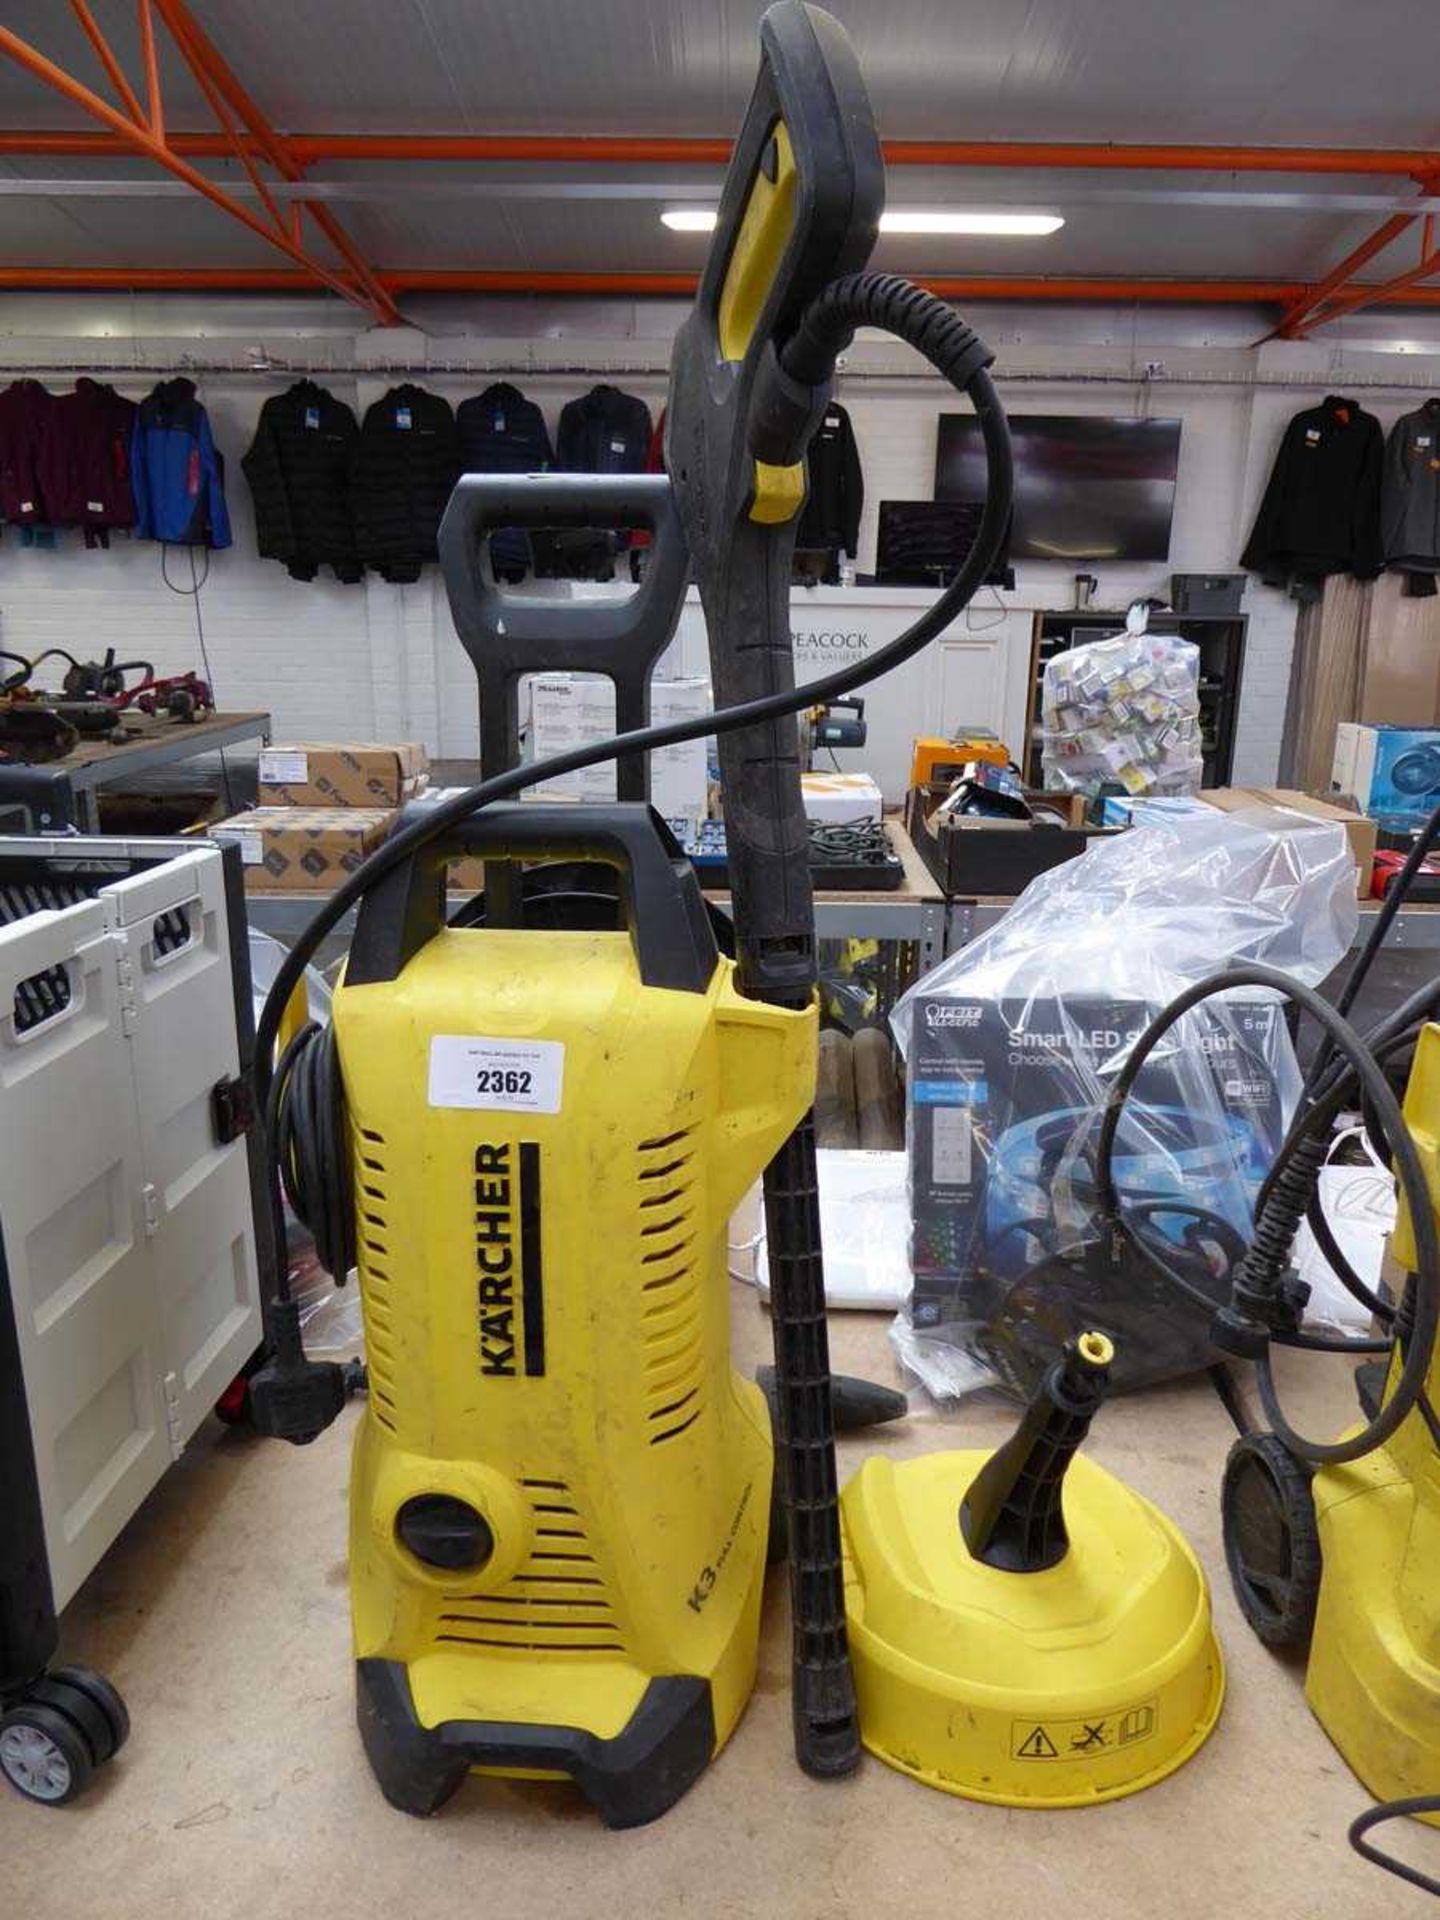 Karcher K3 Full Control electric pressure with lance and patio cleaning attachment